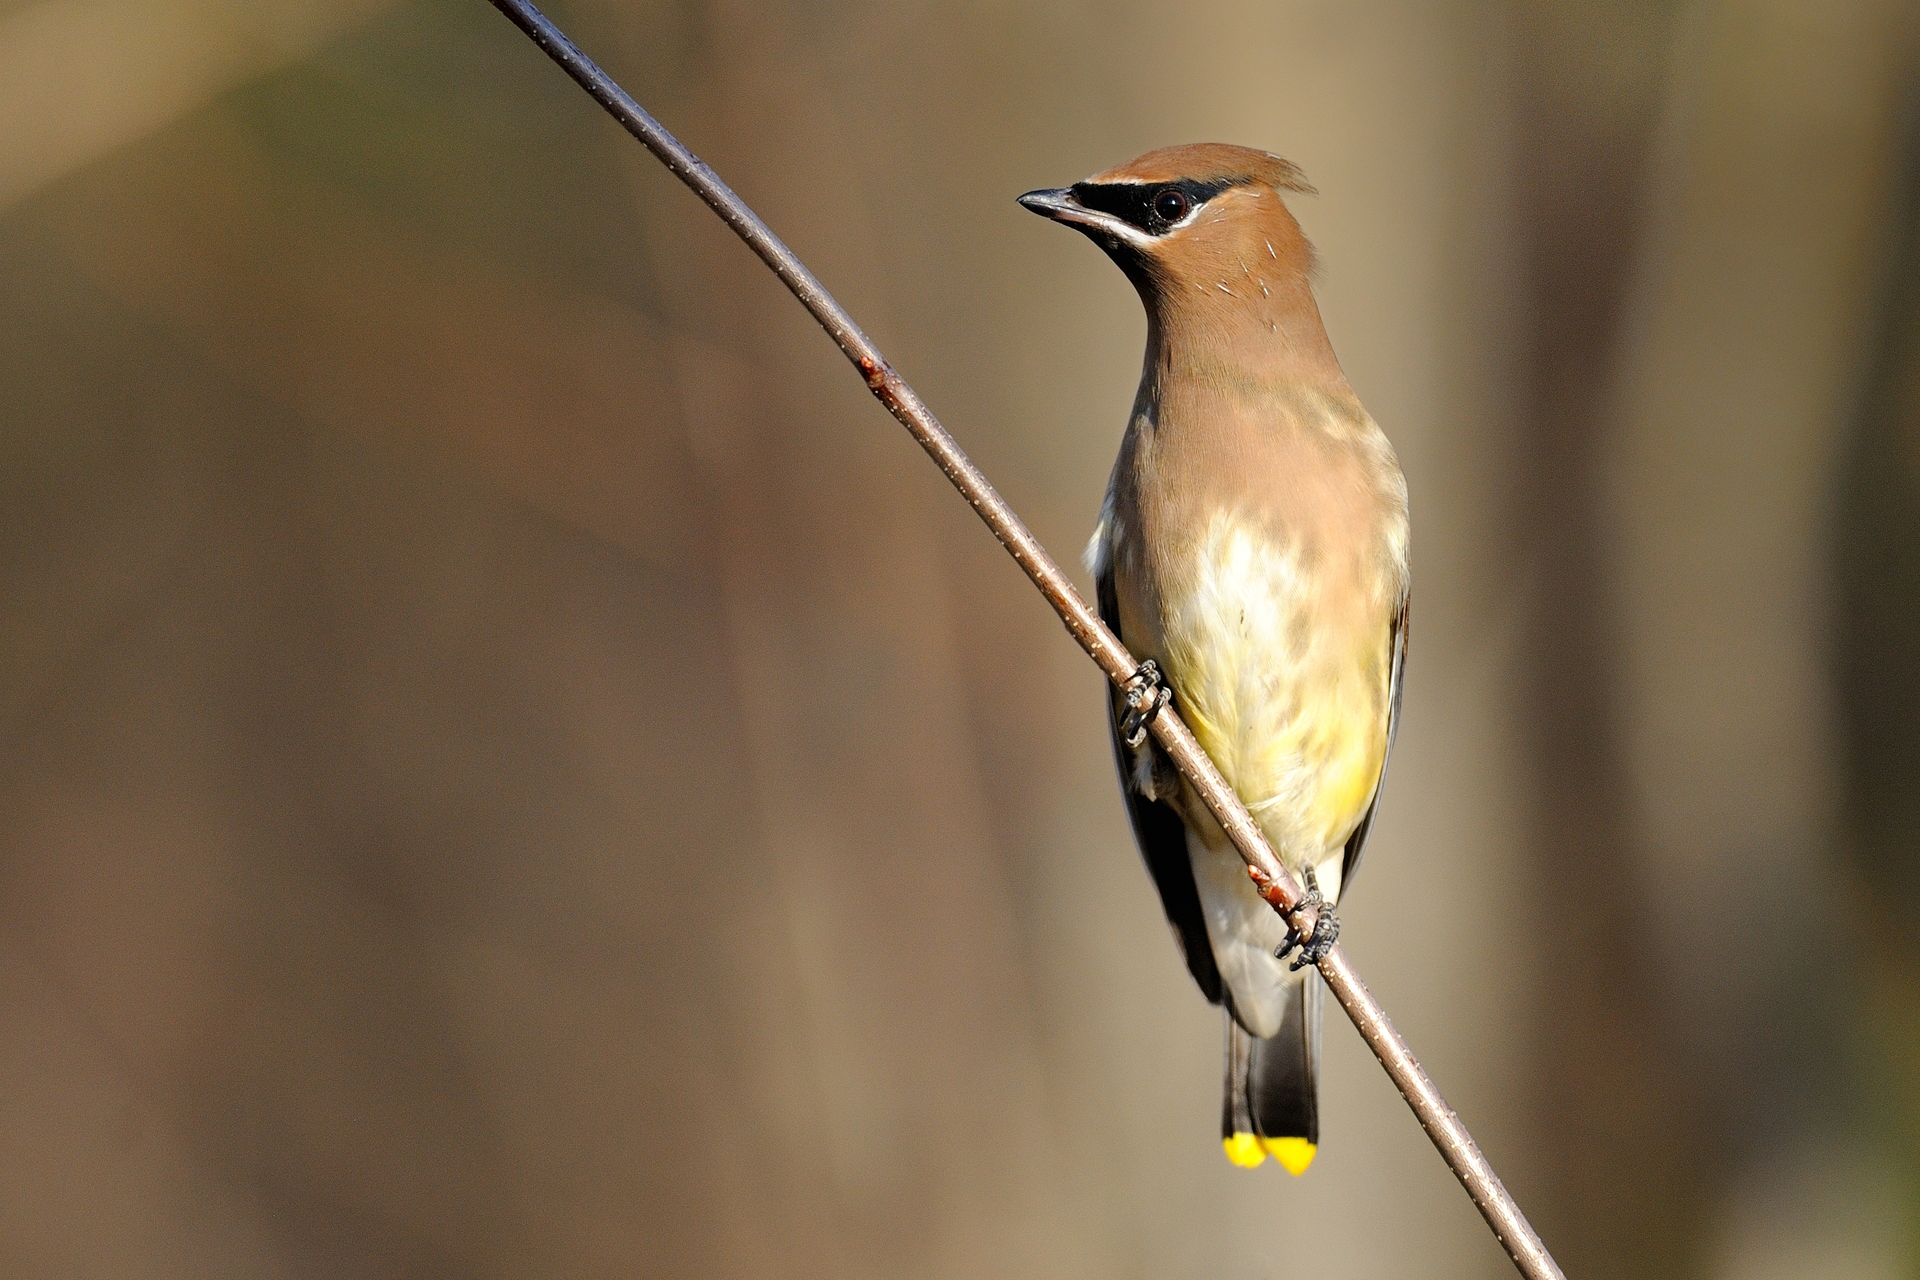 Cedar Waxwing on a stick, facing the camera but looking to the side.